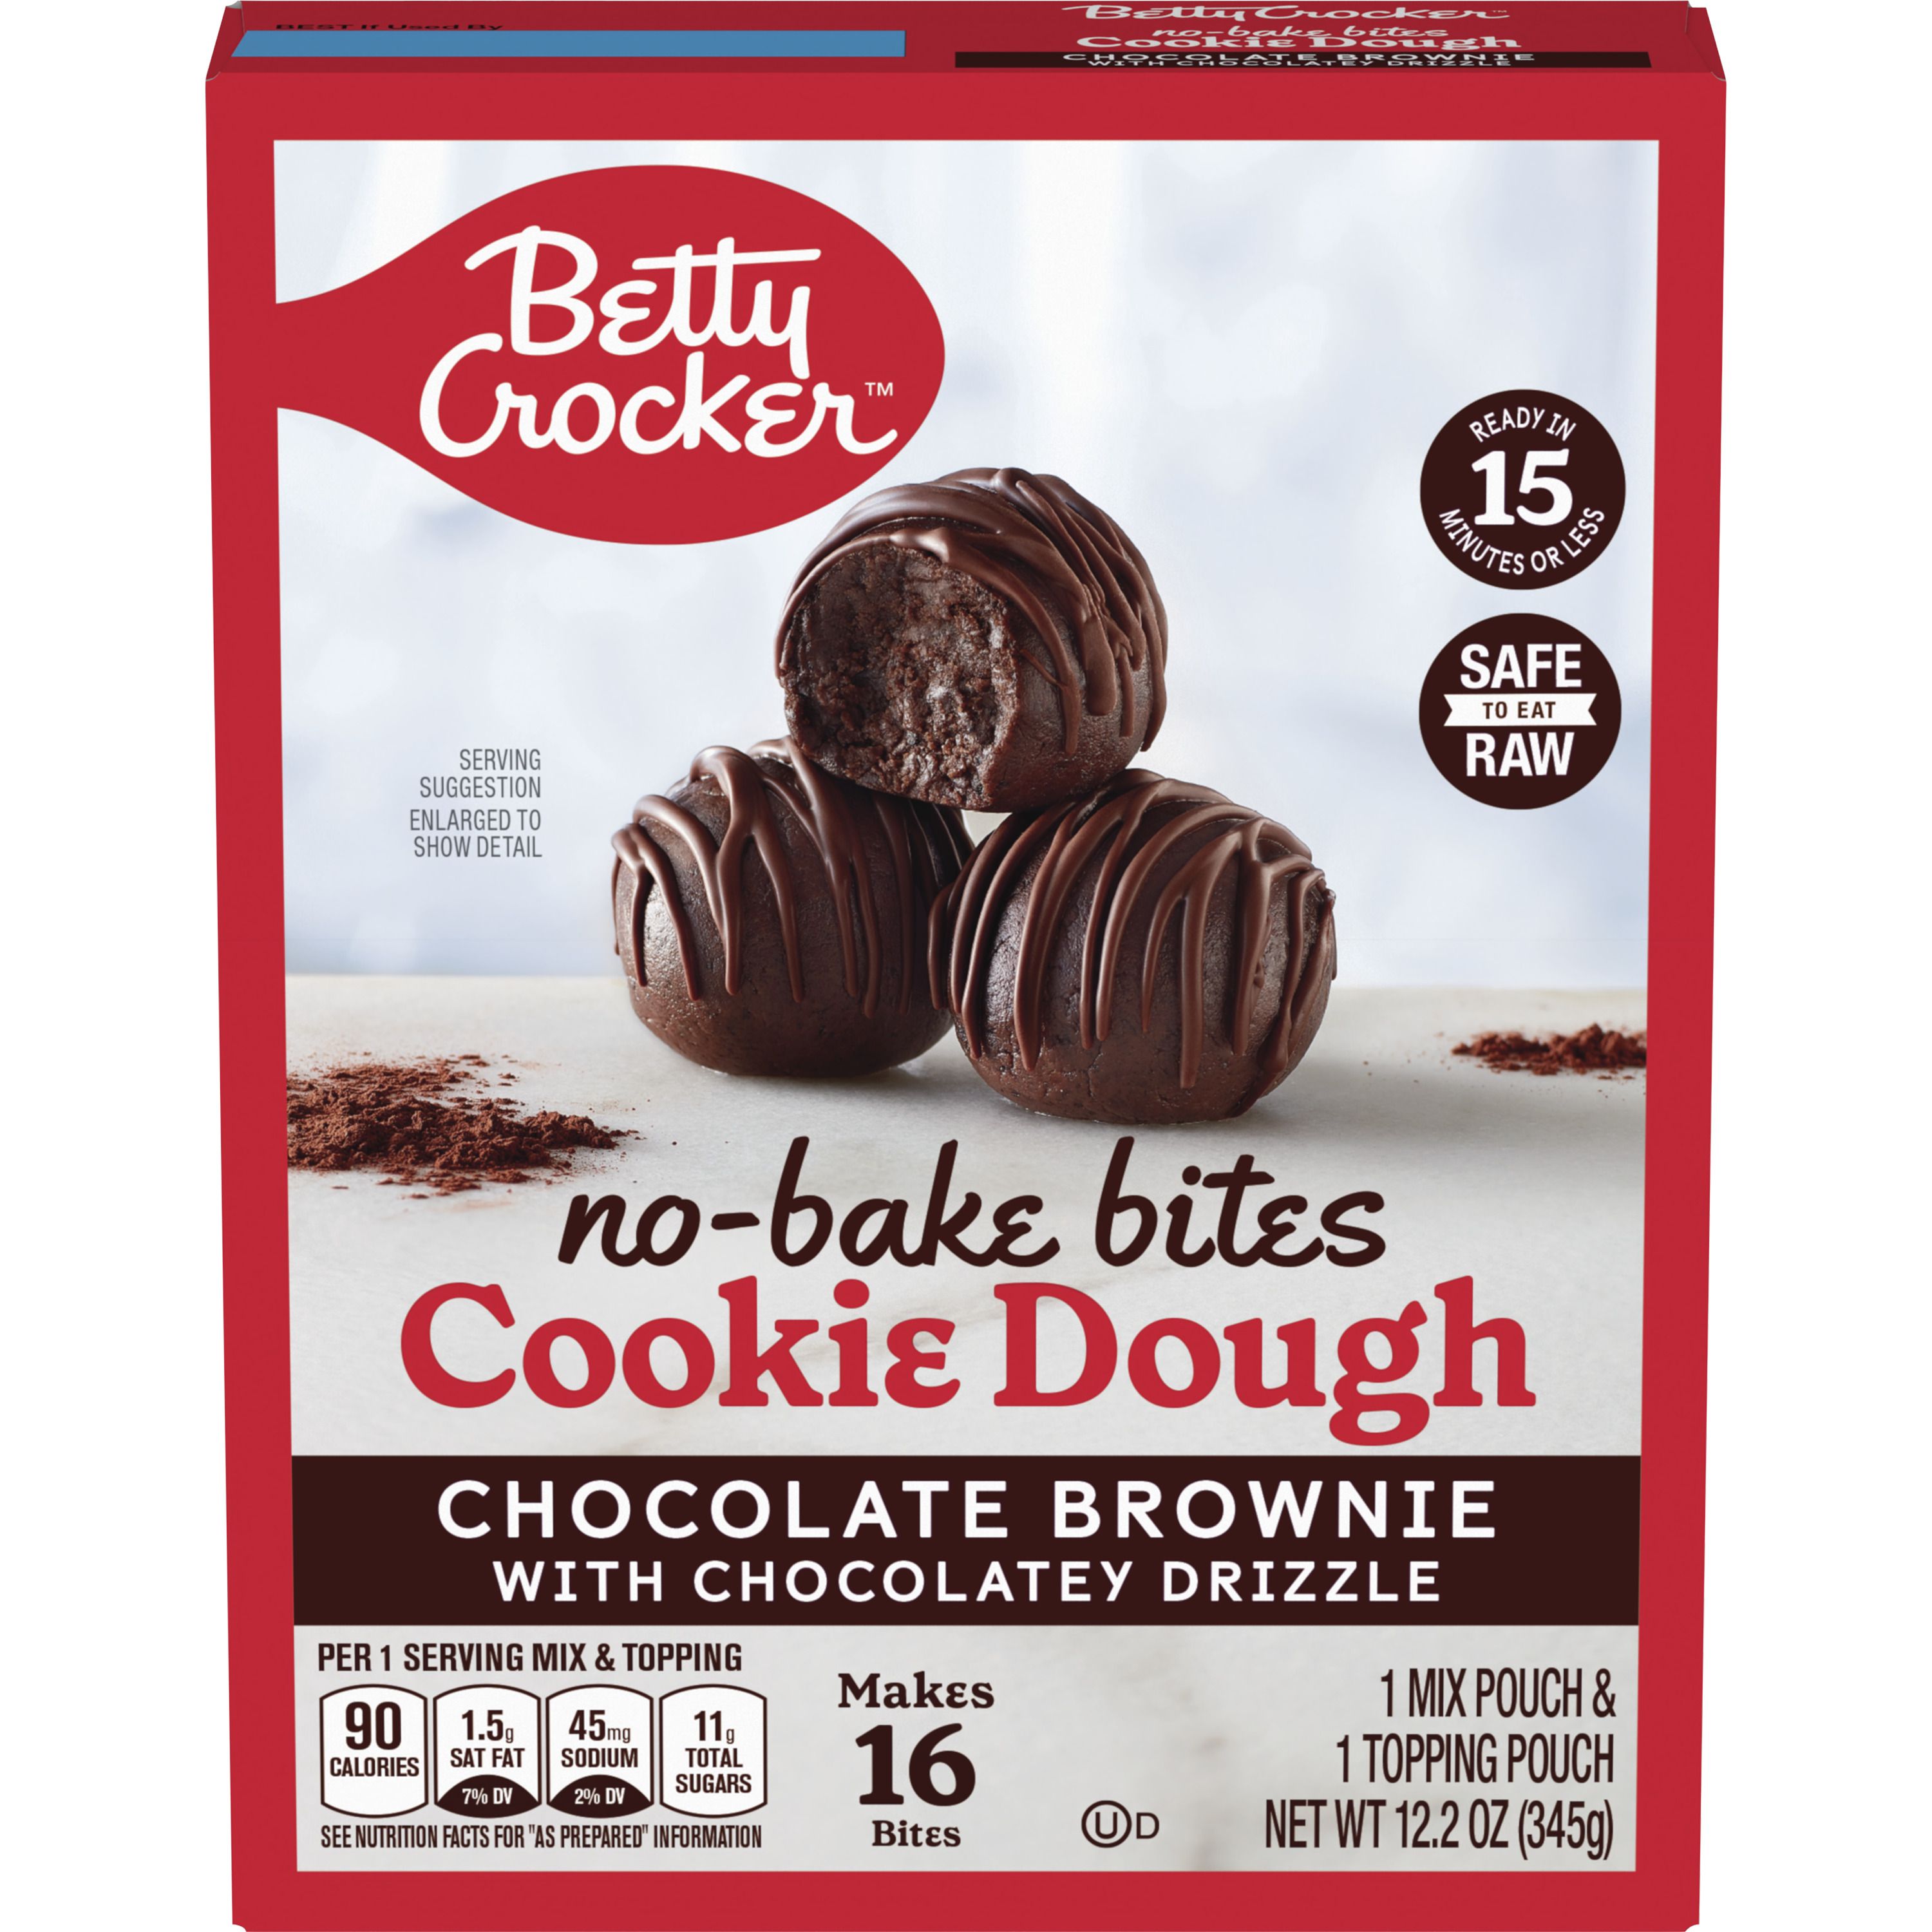 Betty Crocker™ No-Bake Bites Cookie Dough, Chocolate Brownie with Chocolatey Drizzle - Front